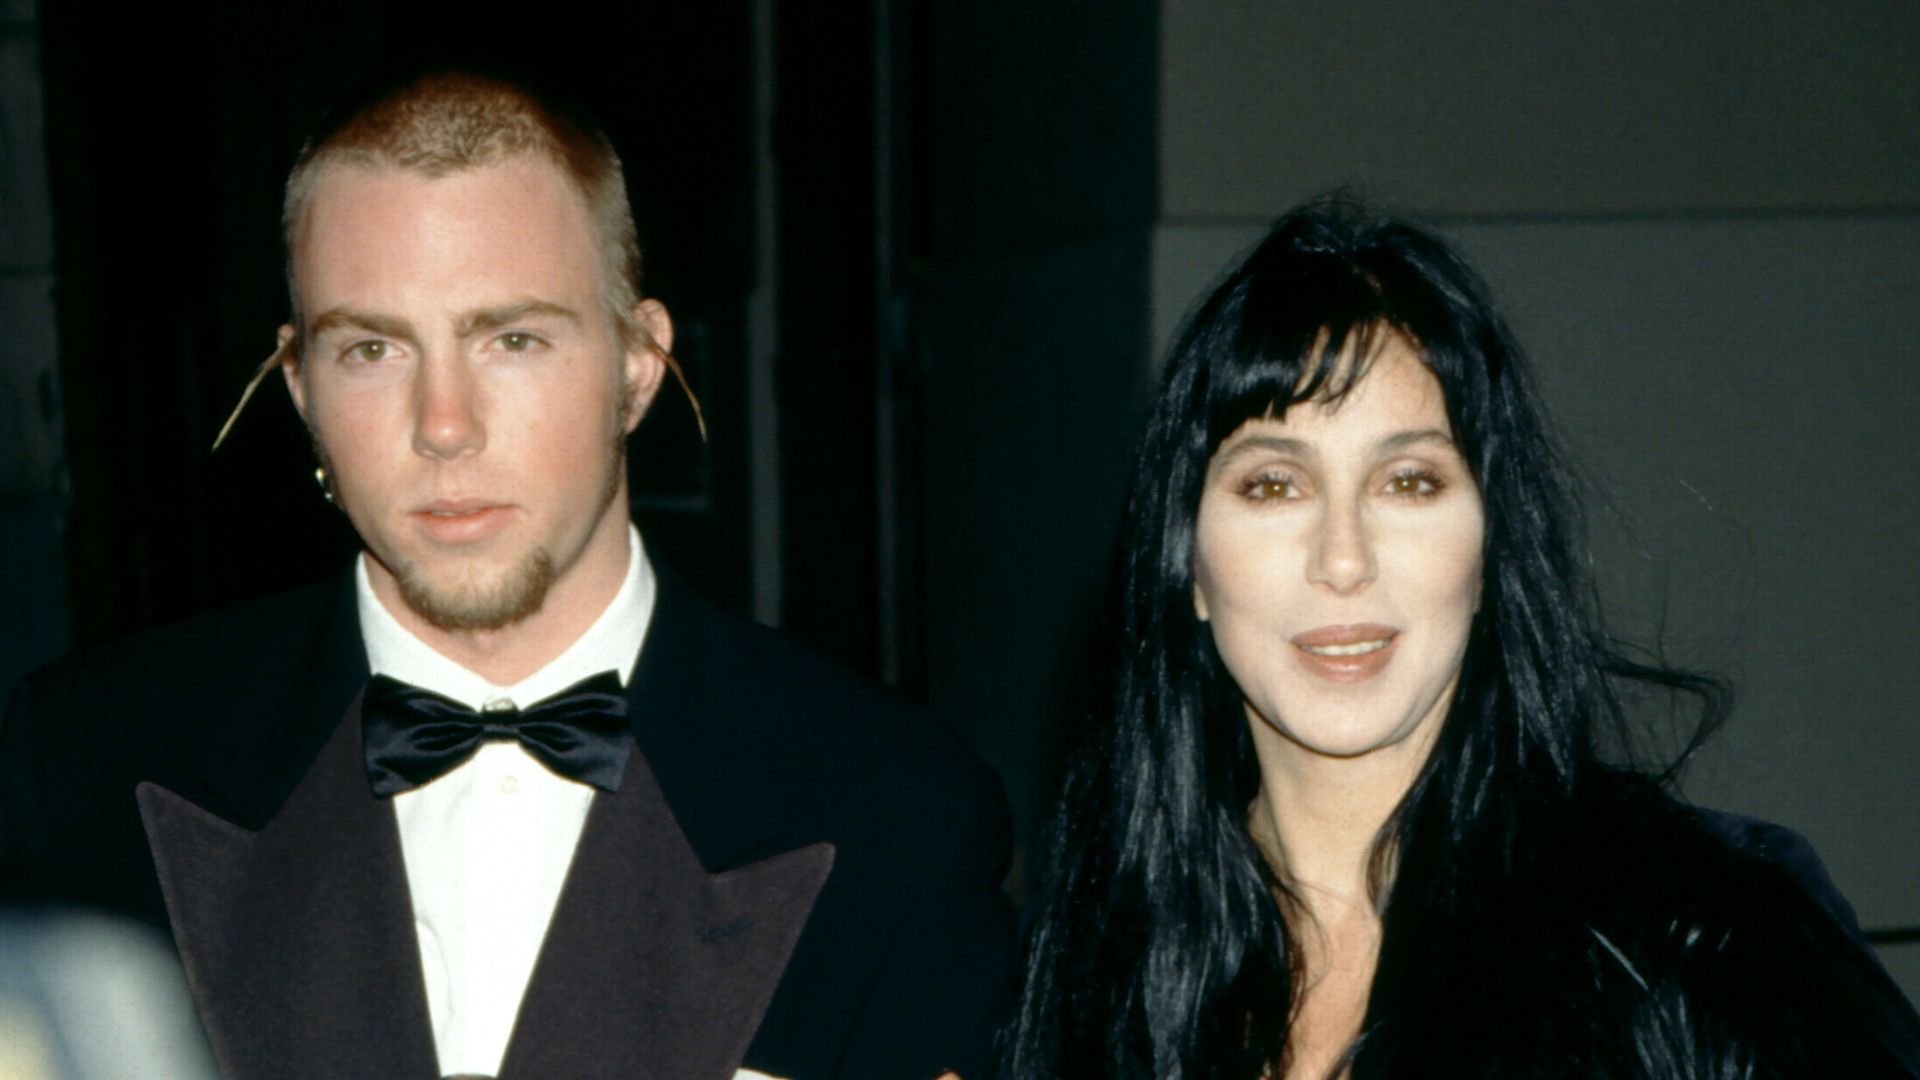 Elijah Blue Allman and Cher attend the 5th Annual Fire and Ice Ball to Benefit Revlon UCLA Women Cancer Center on December 7, 1994 at the 20th Century Fox Studios in Century City, California